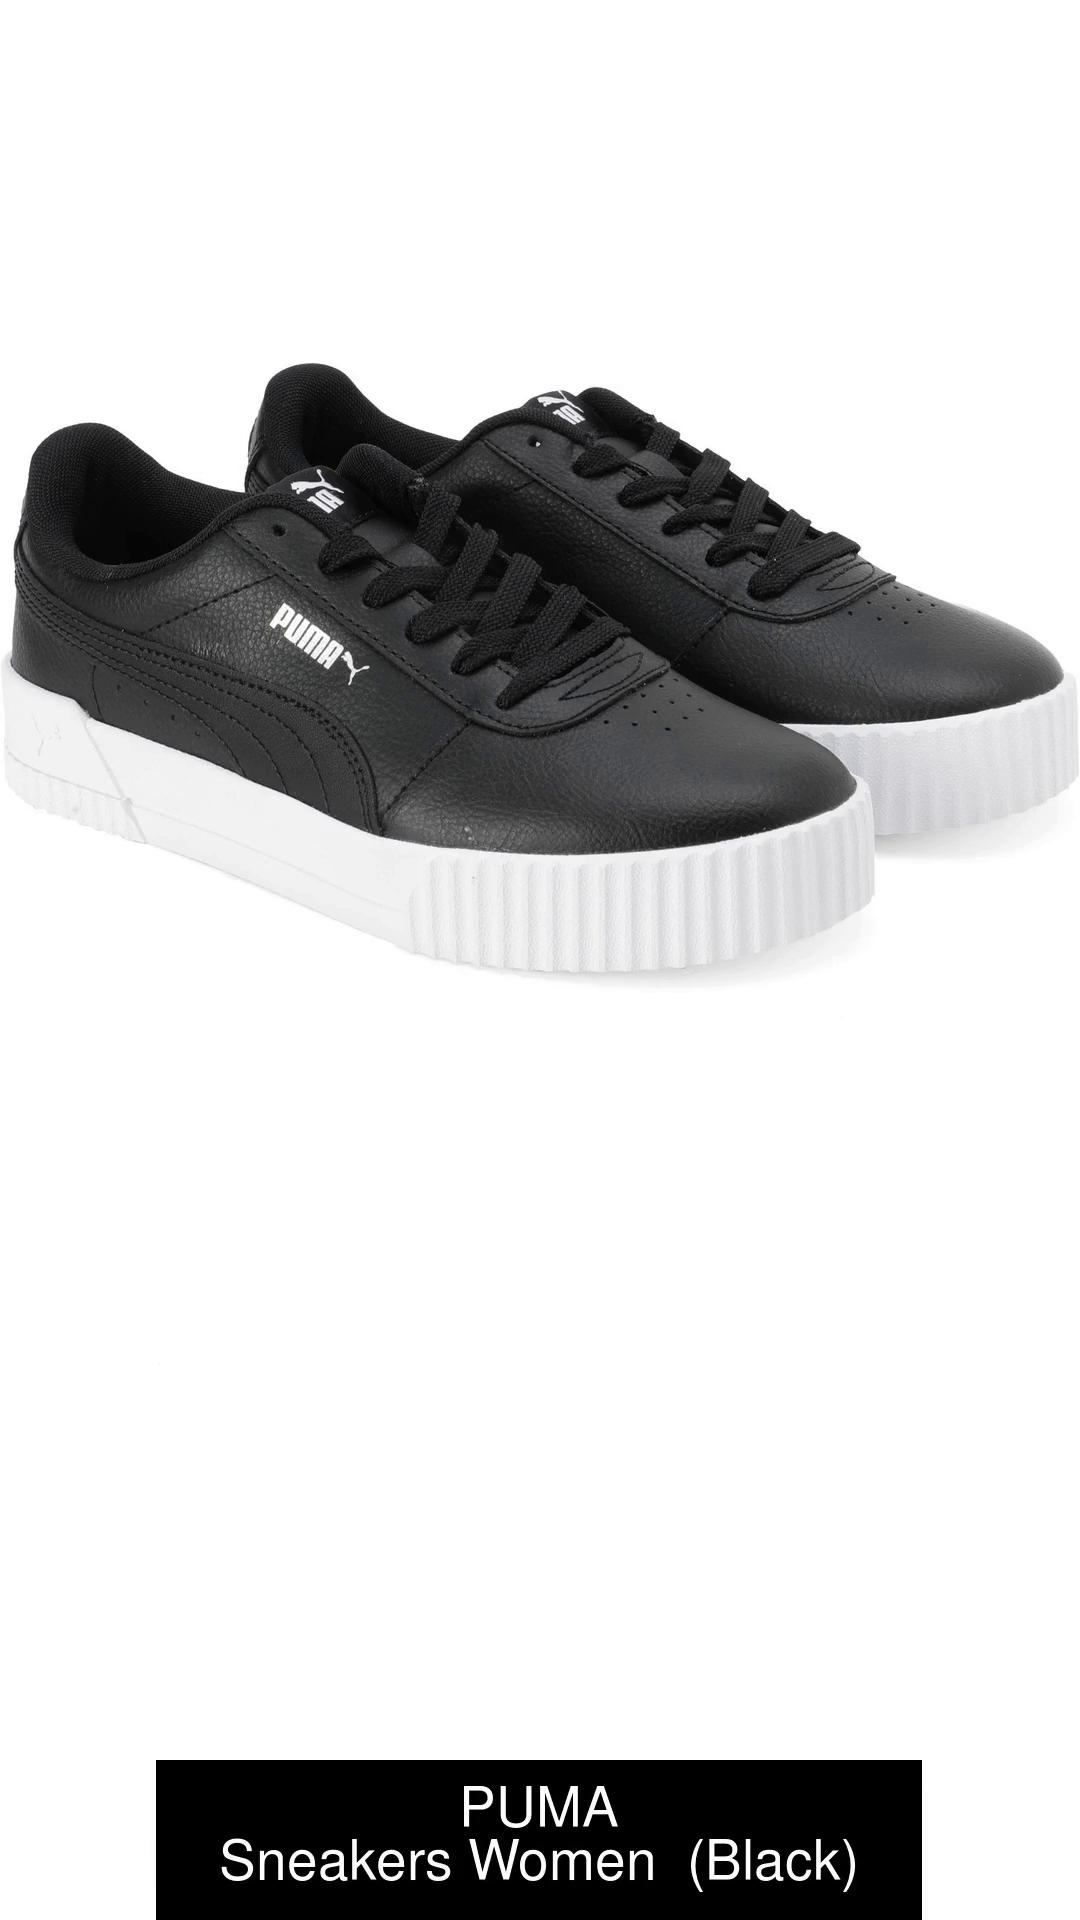 PUMA Carina for in Sneakers Footwears Online For For at Sneakers Women Price Shop - India Buy - L Women Online PUMA L Best Carina